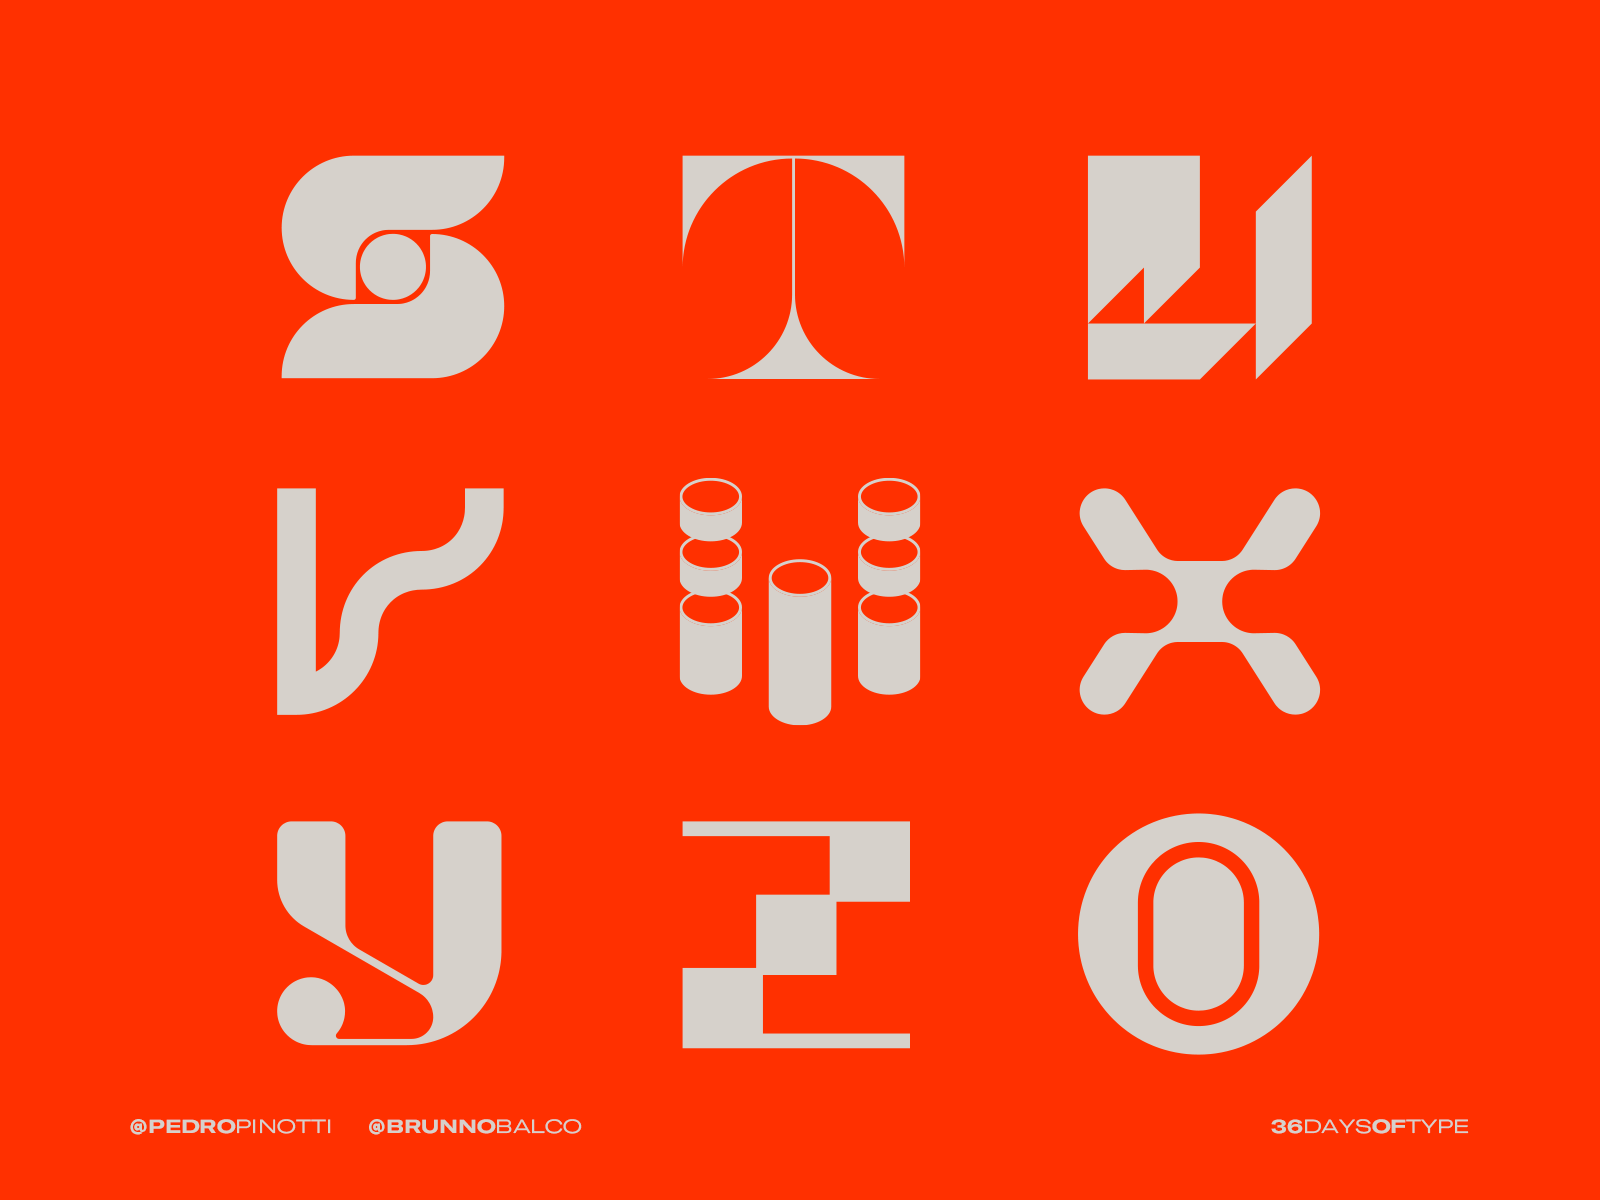 S to 0 — 36 Days of Type by Pedro Pinotti on Dribbble